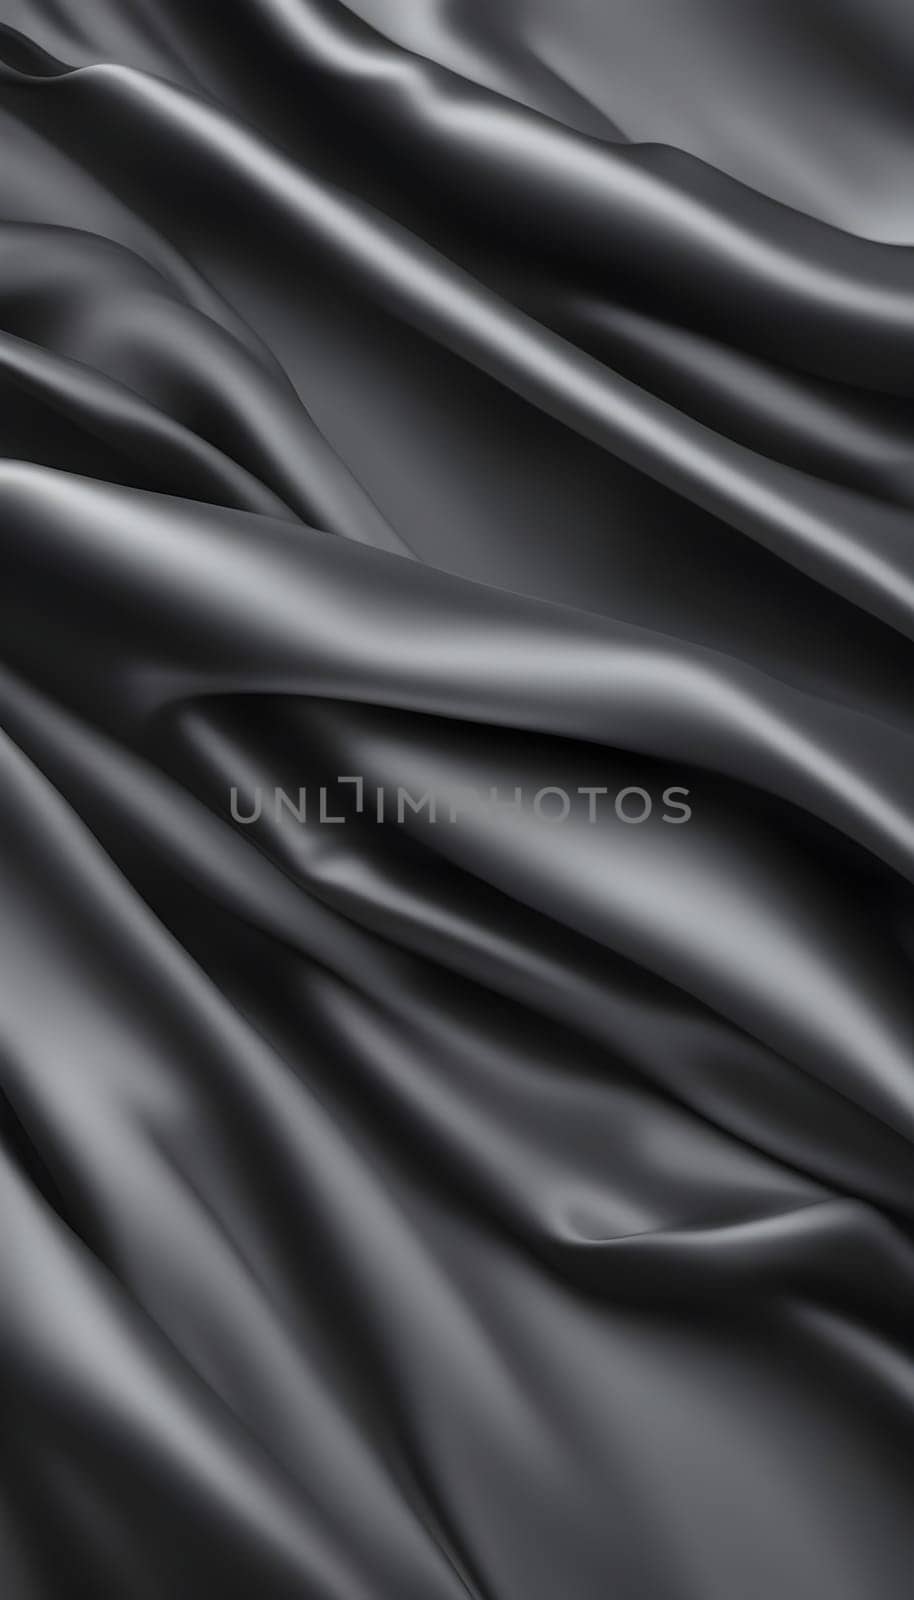 Technology background realistic color background folds of fabric or overlay for product or in shades of metallic black color Generate AI